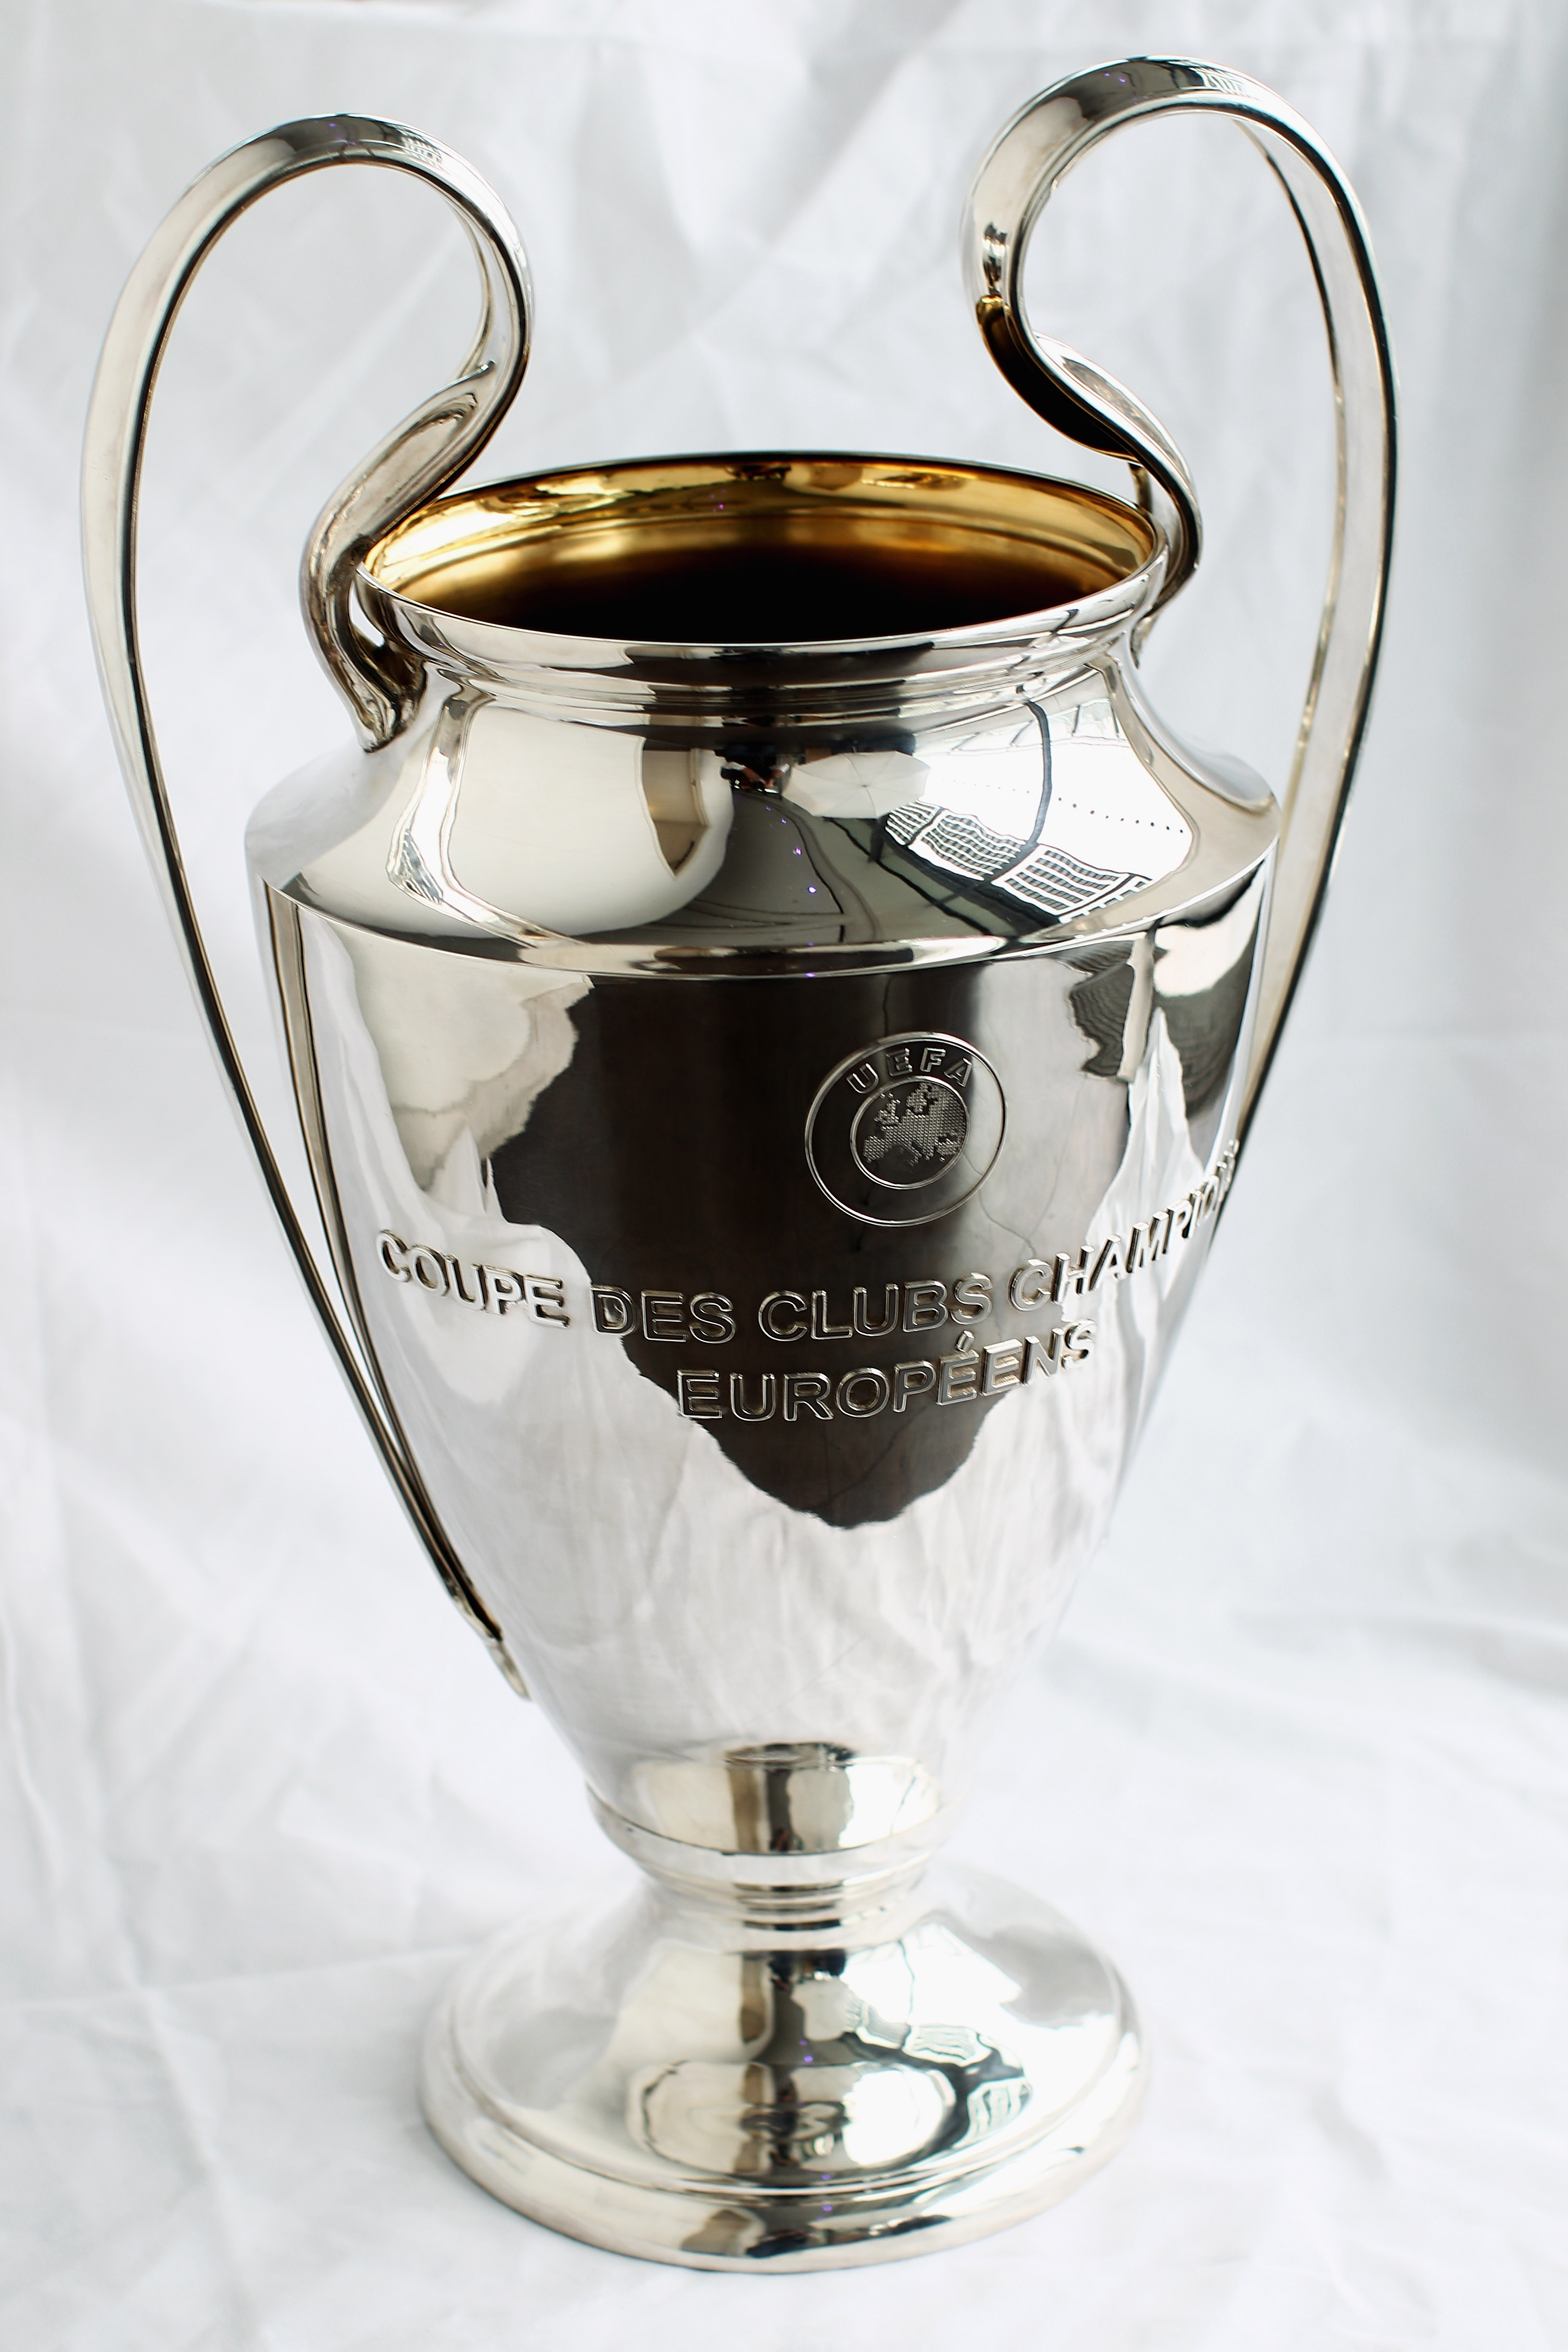 Uefa Champions League Ranking The Winners Bleacher Report Latest News Videos And Highlights